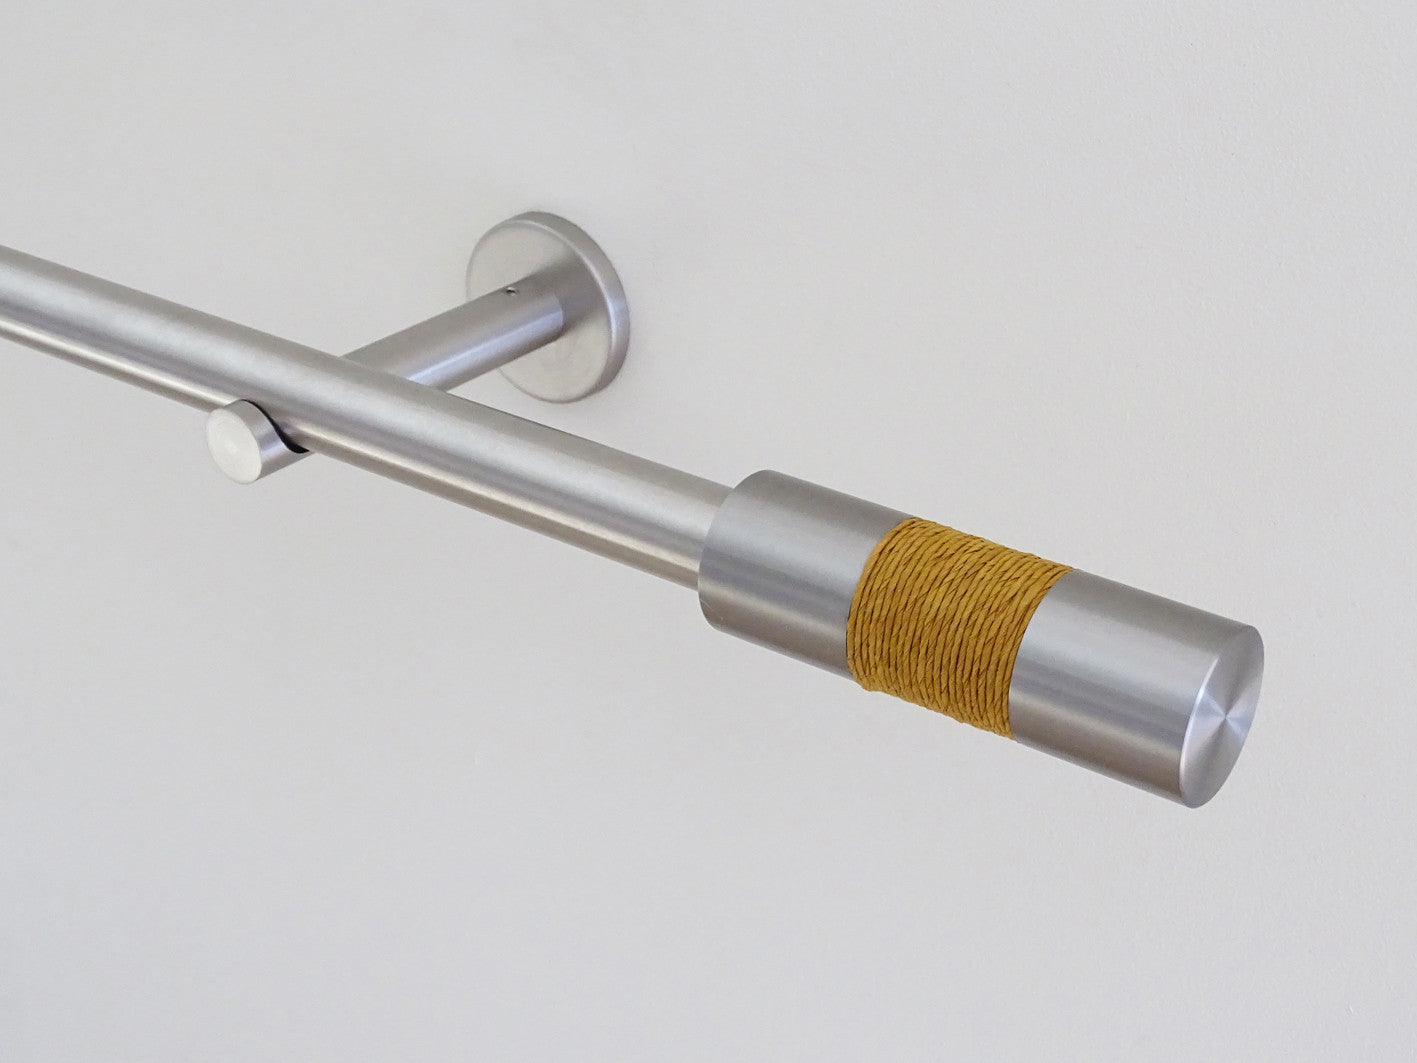 19mm diameter stainless steel curtain pole sets with steel barrel finials in old gold